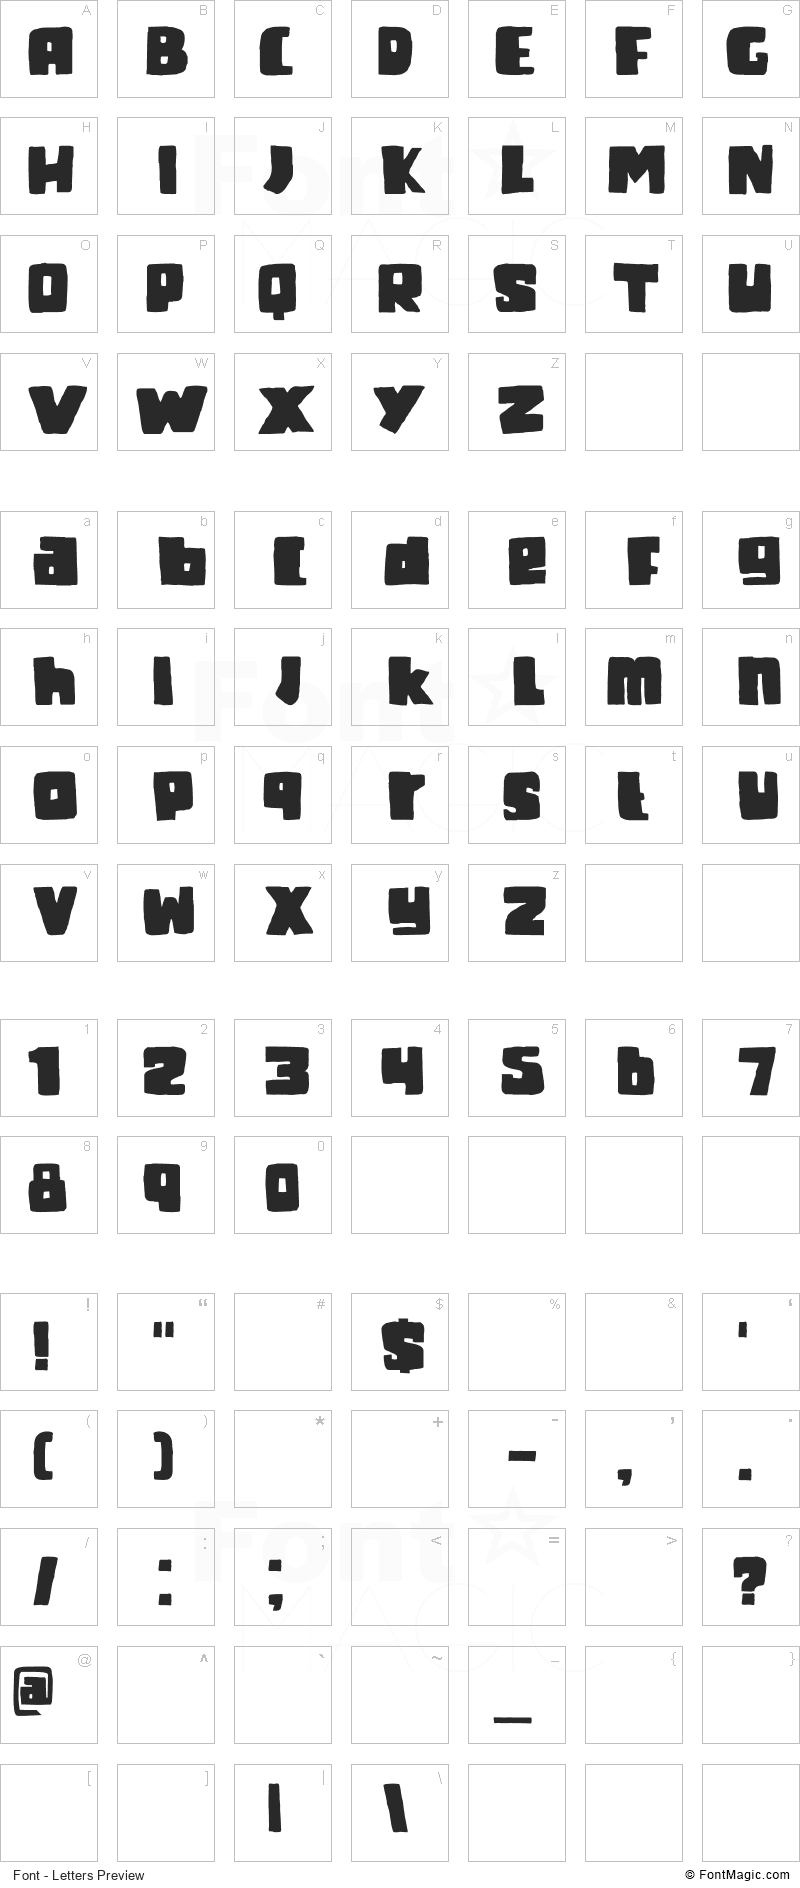 DK Fat Kitty Kat Font - All Latters Preview Chart